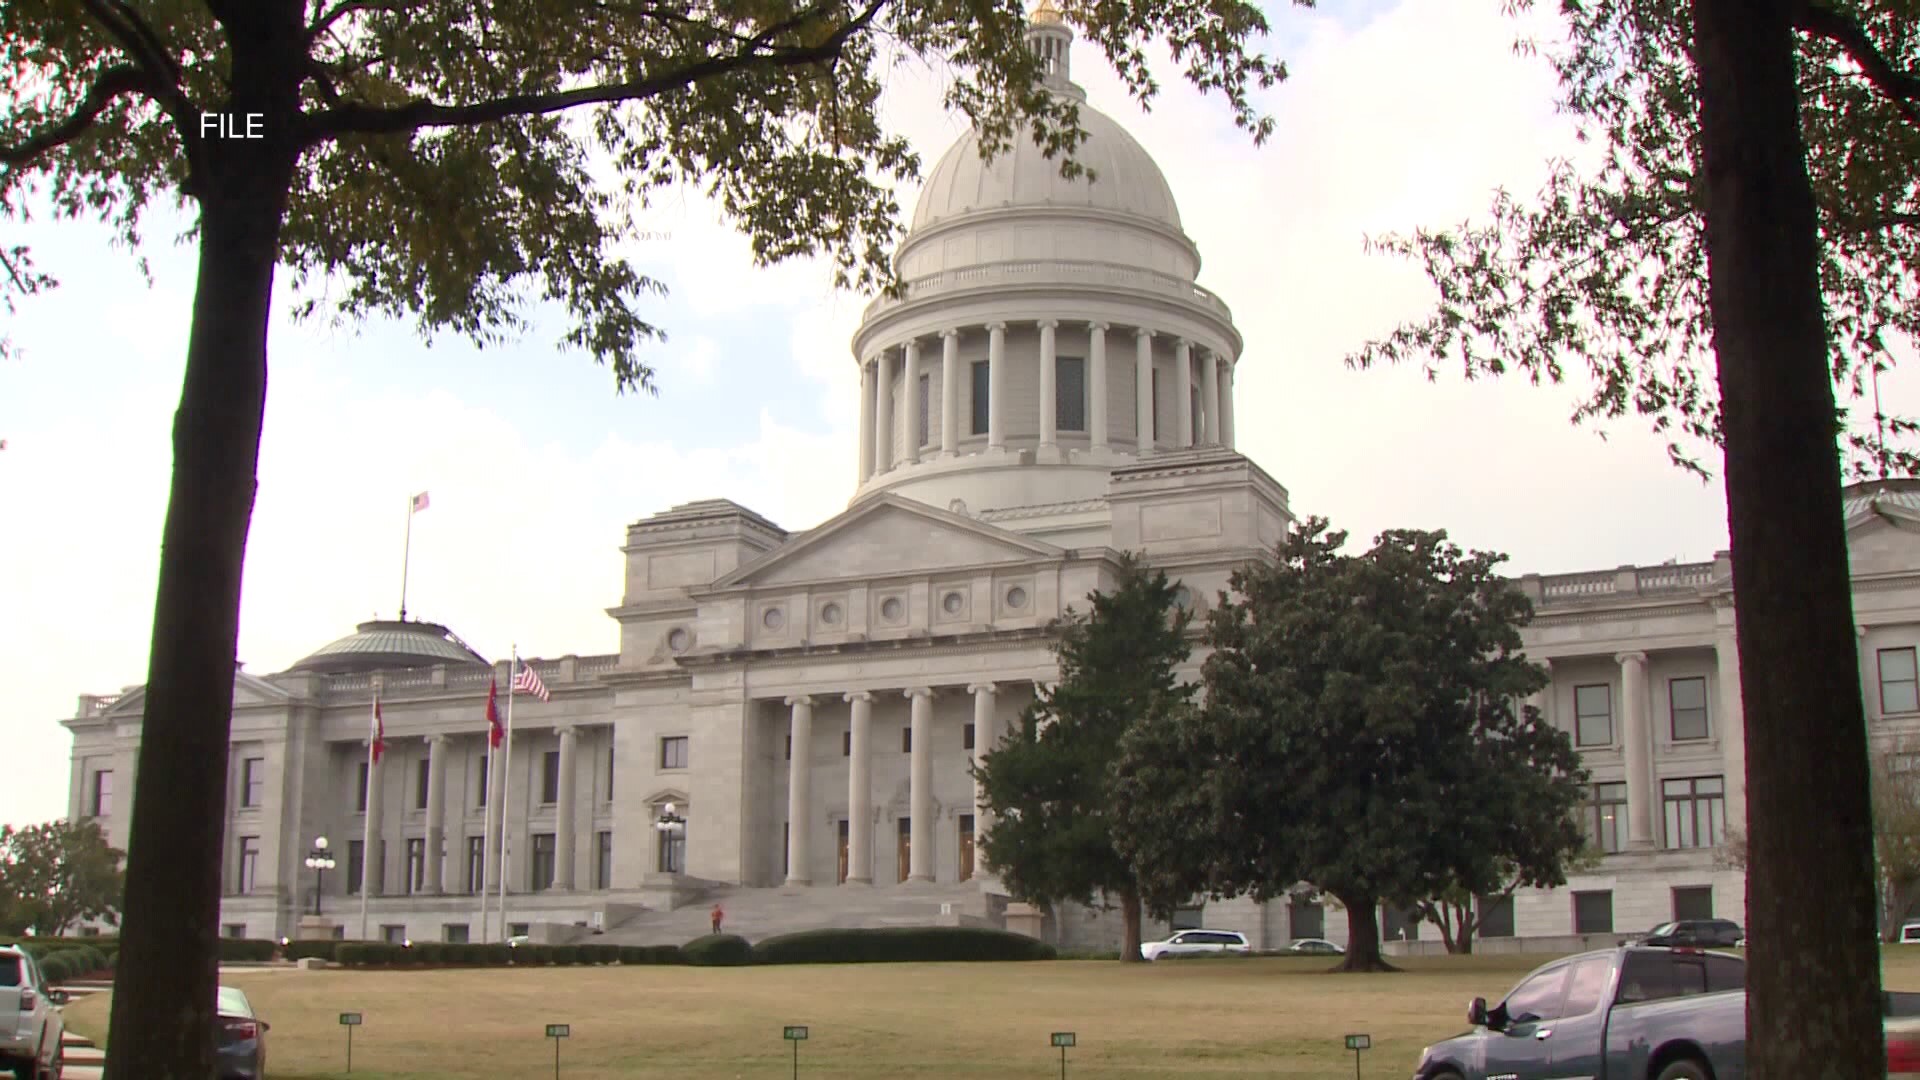 After the Arkansas legislature passed, dozens of bills signed by the Governor during their last session are going into effect.